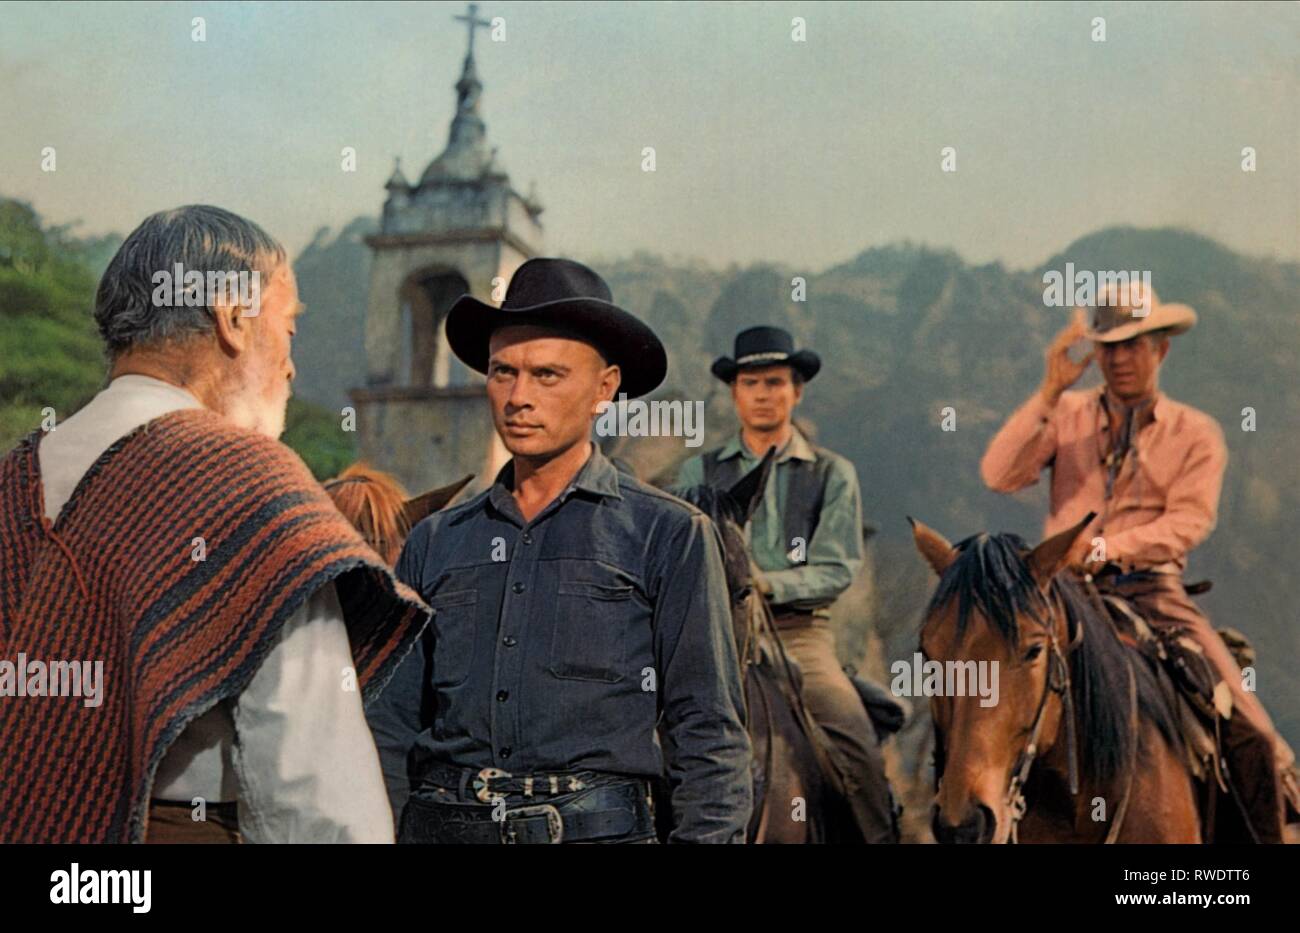 SOKOLOFF, BRYNNER,BUCHHOLZ, MCQUEEN, The Magnificent Seven, 1960 Banque D'Images